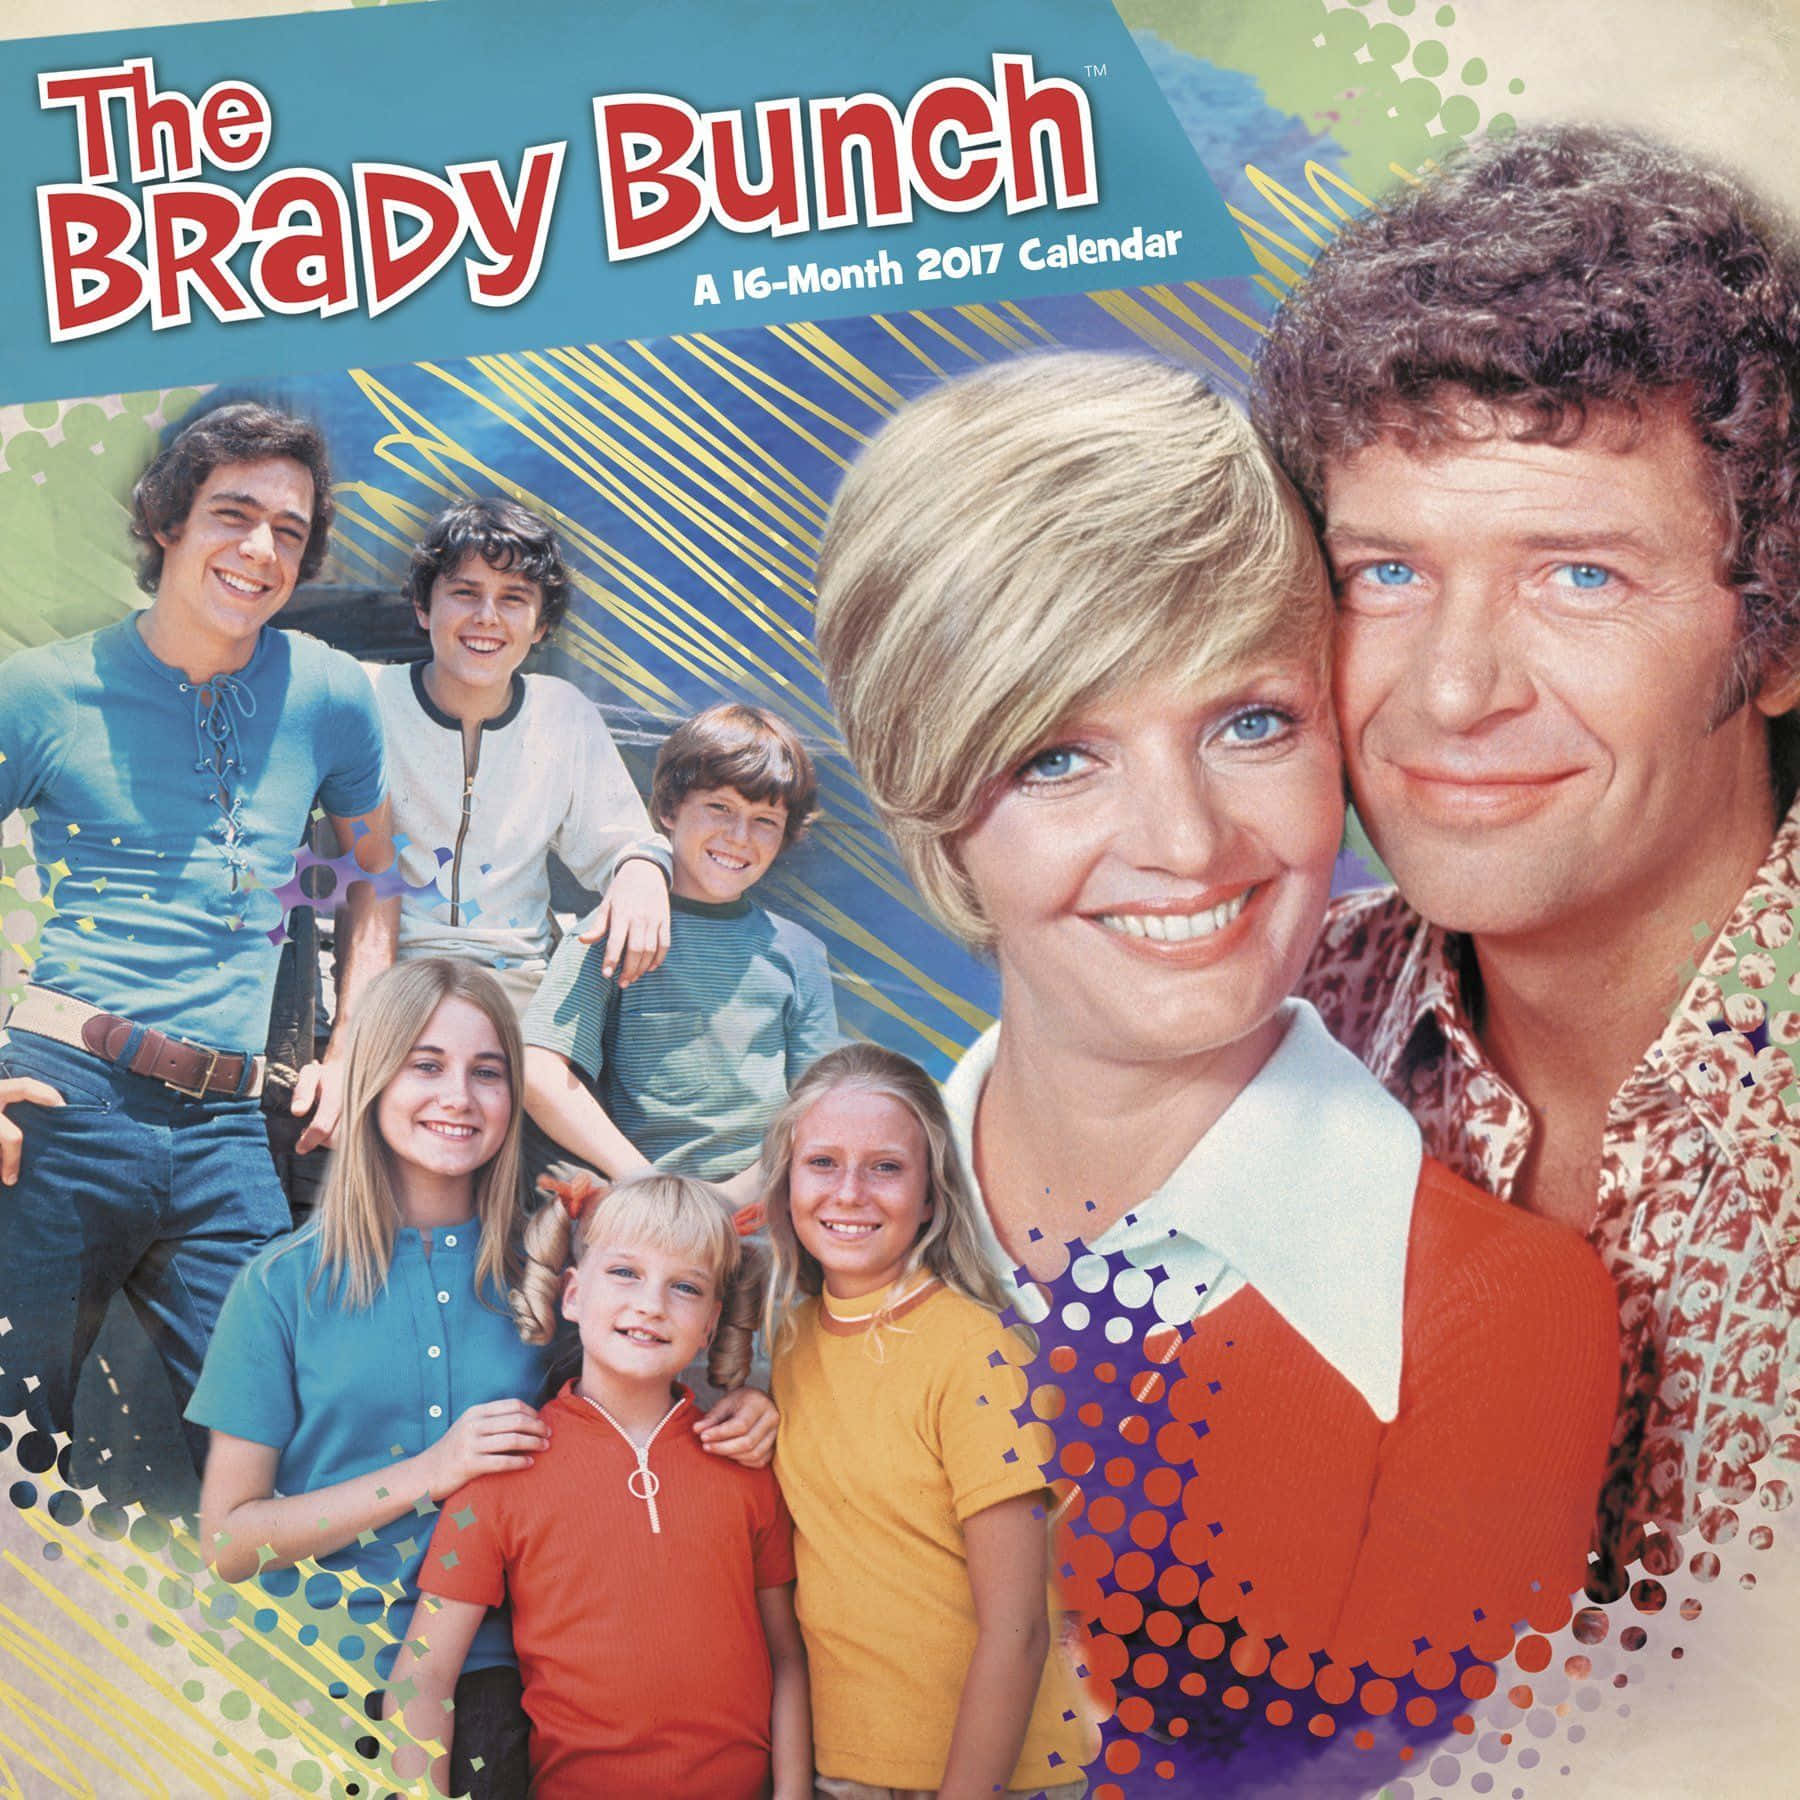 The Iconic Brady Bunch Family Wallpaper